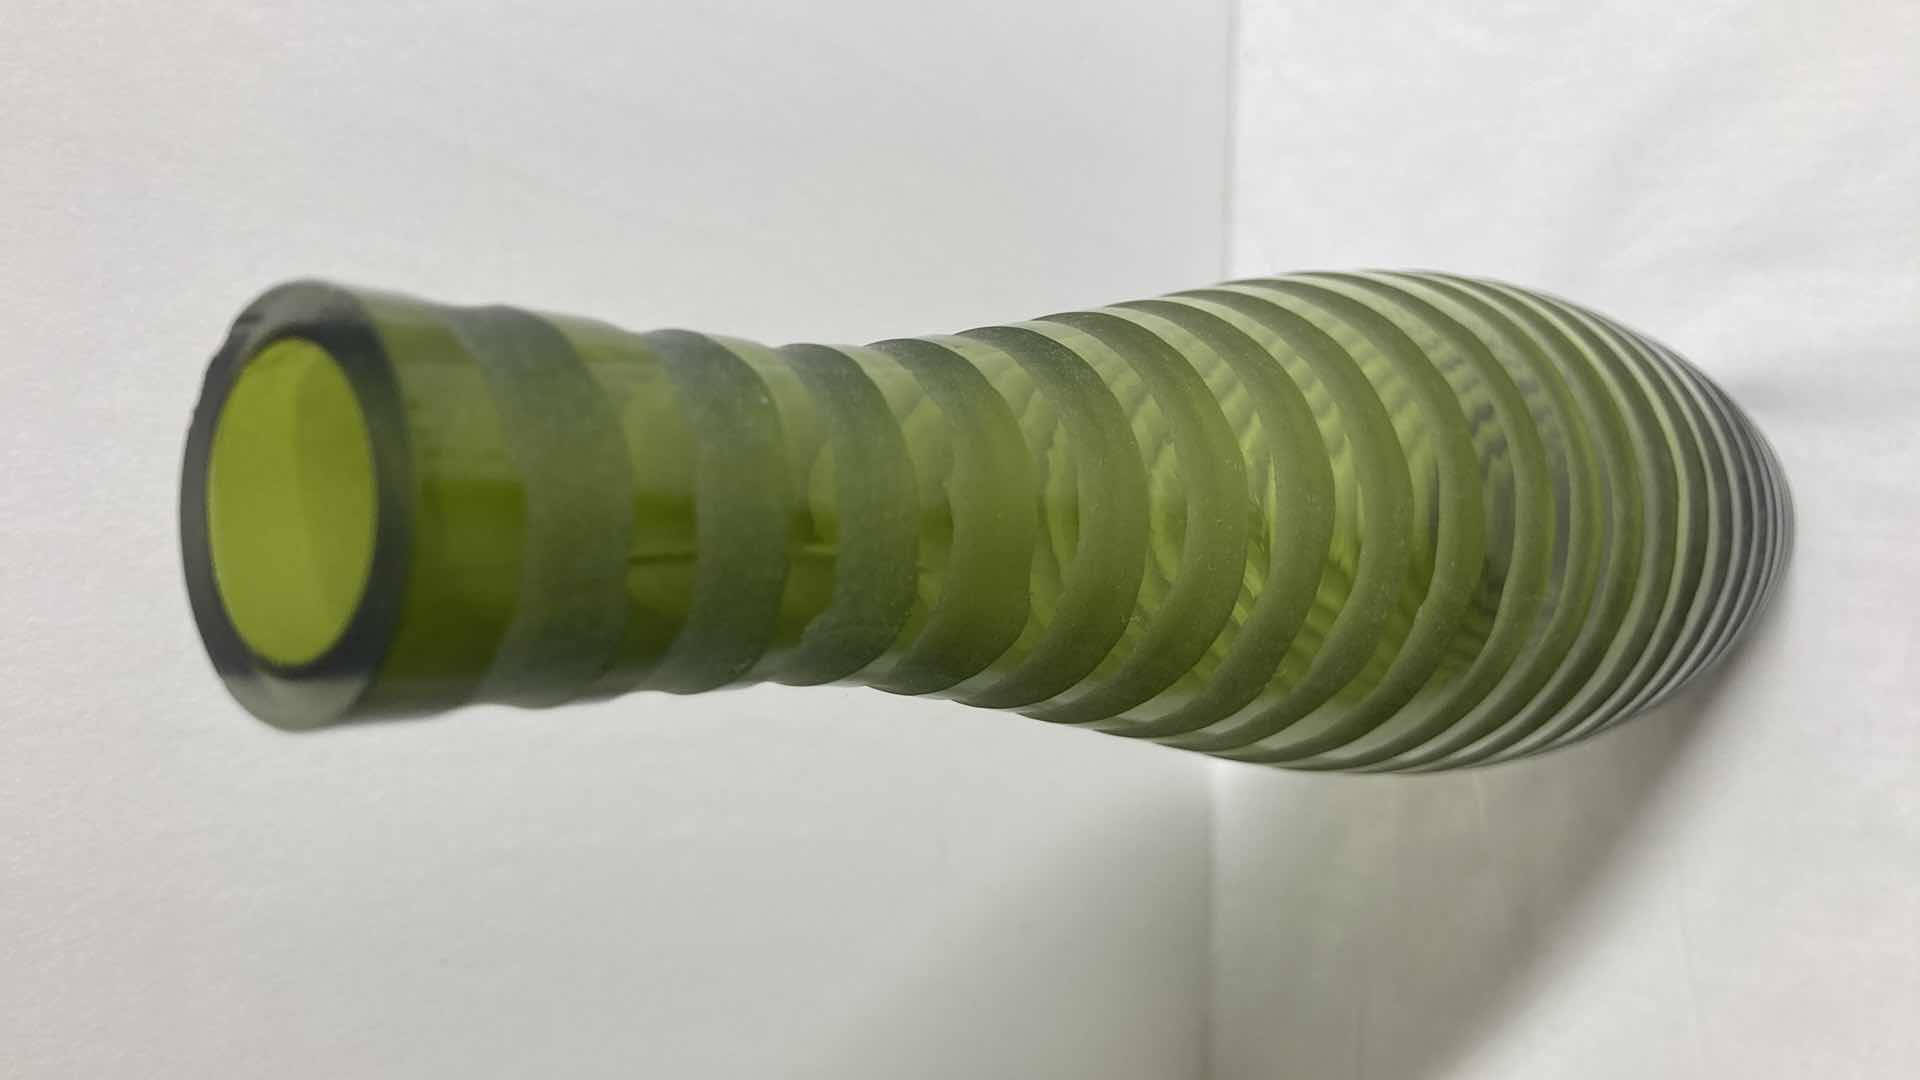 Photo 3 of LINEAR GREEN GLASS VASE 2.75” X 11.75”